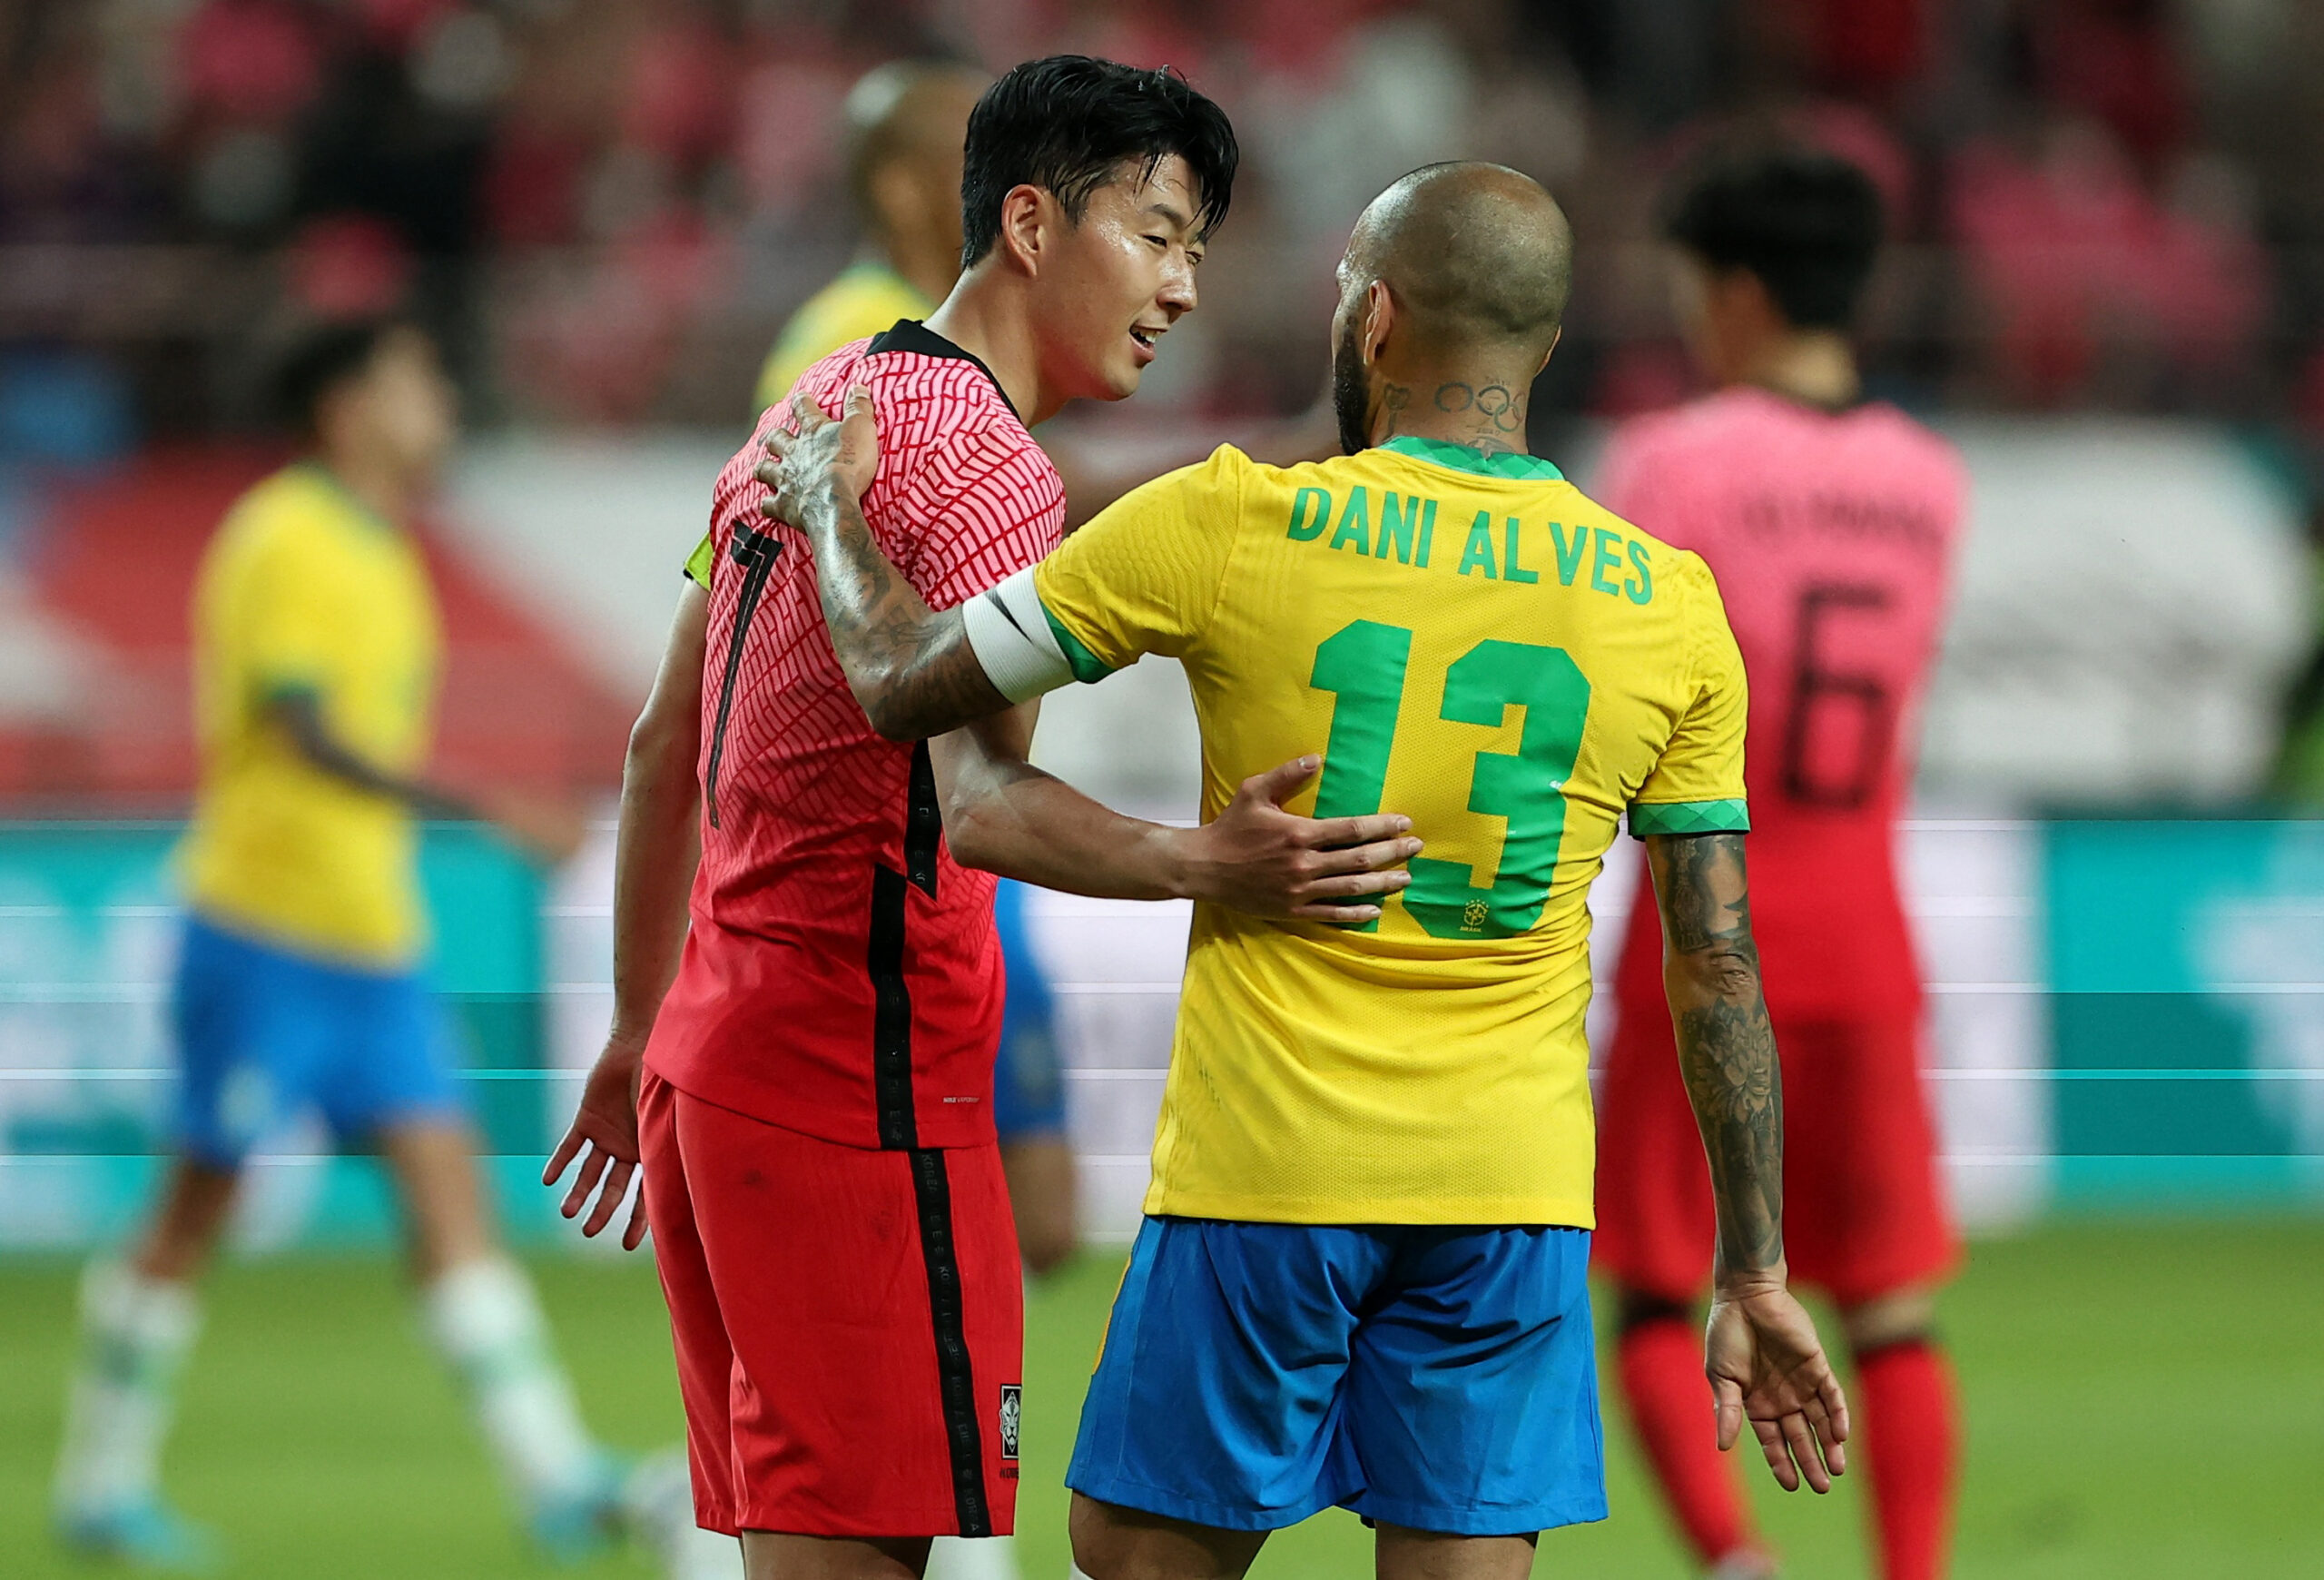 Son Heung-min struggled mightily in South Korea's heavy 4-1 defeat against Brazil, in which he failed to generate any significant offense